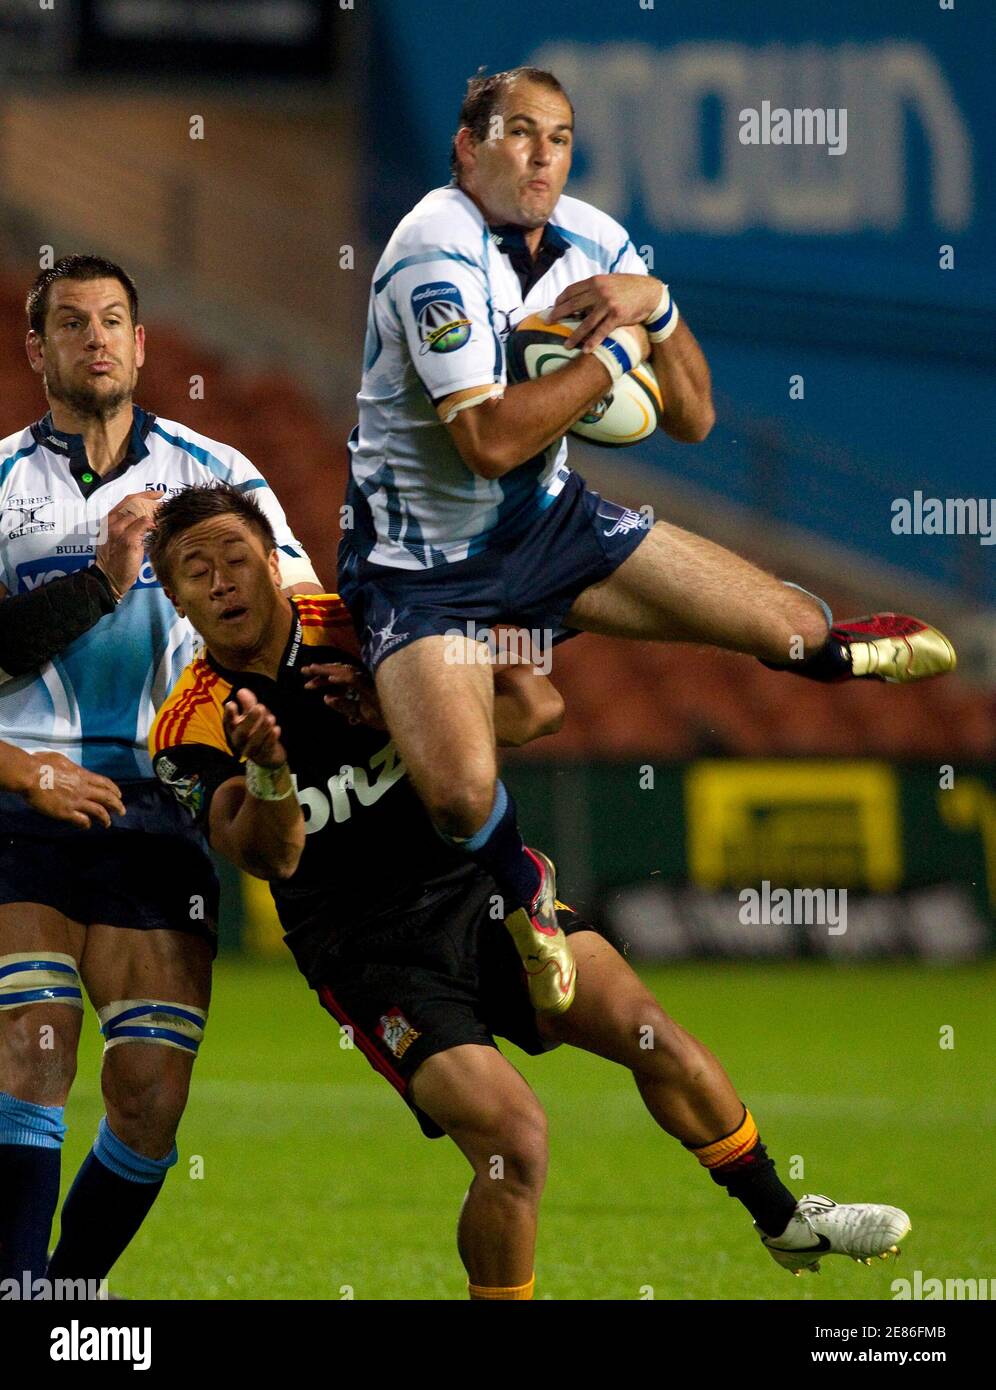 Fourie du Preez of South Africa's Bulls takes a high ball despite the  tackle of Tim Nanai-Williams of New Zealand's Waikato's Chiefs during their  Super 14 rugby match at Waikato Stadium in